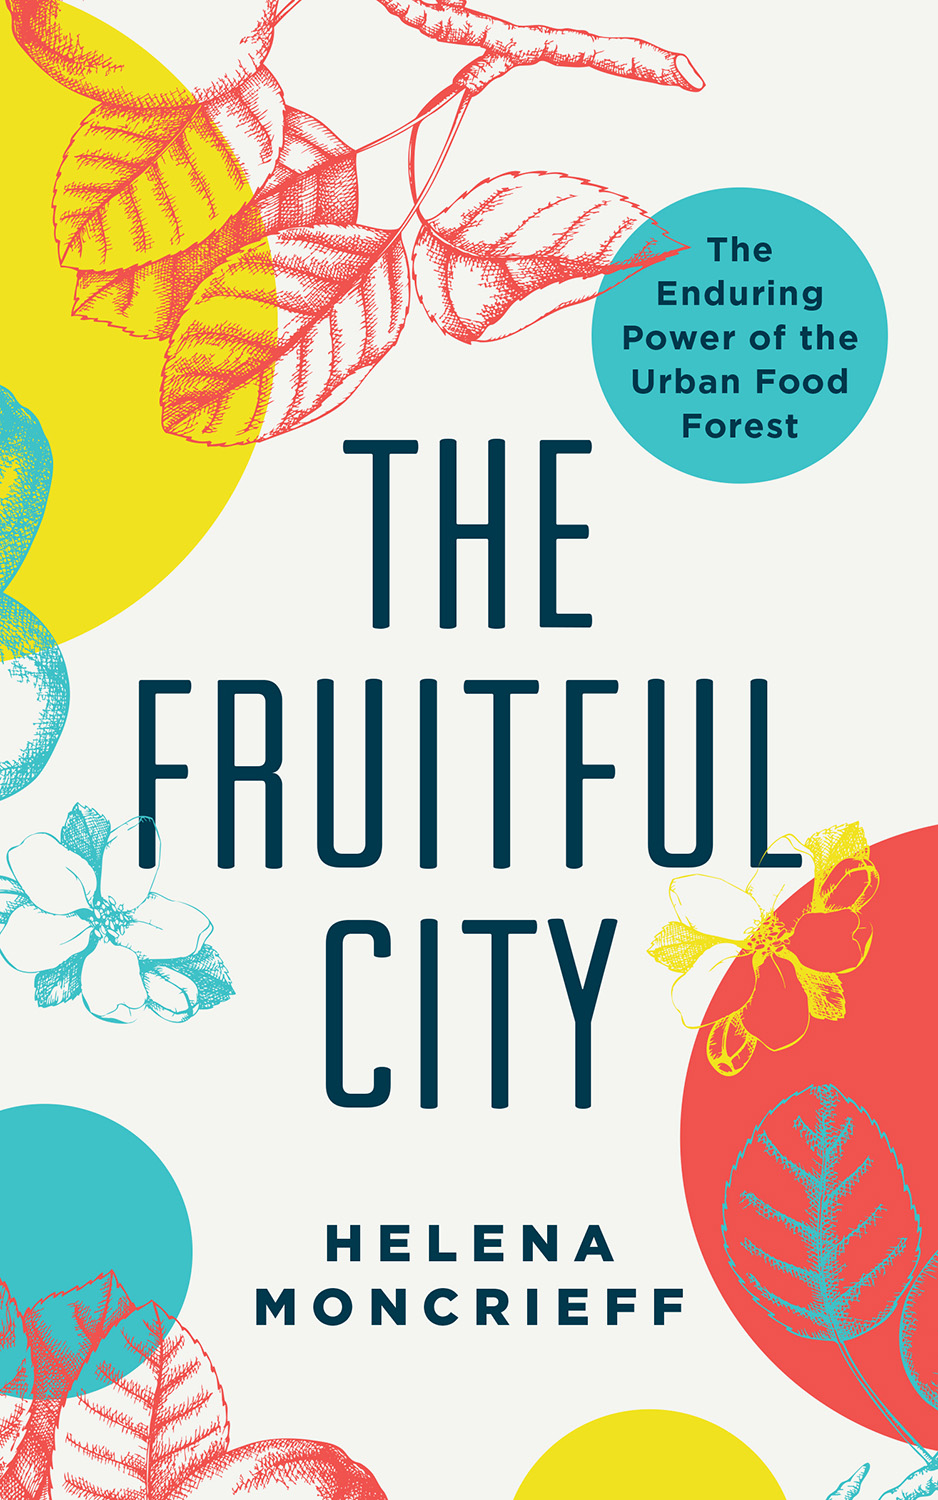 The Fruitful City The Enduring Power of the Urban Food Forest Helena Moncrieff - photo 1